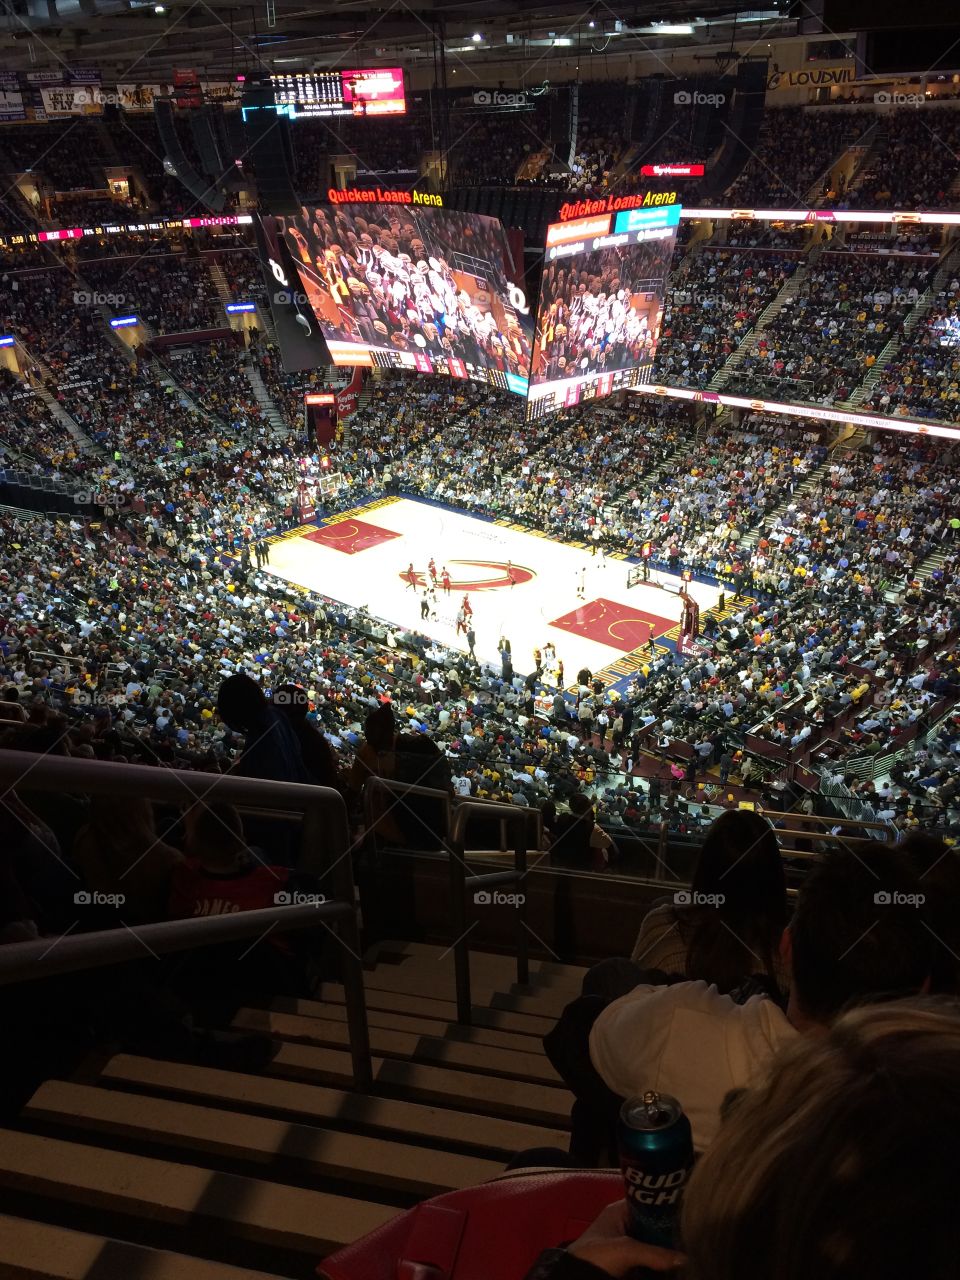 Cleveland Cavaliers Basketball